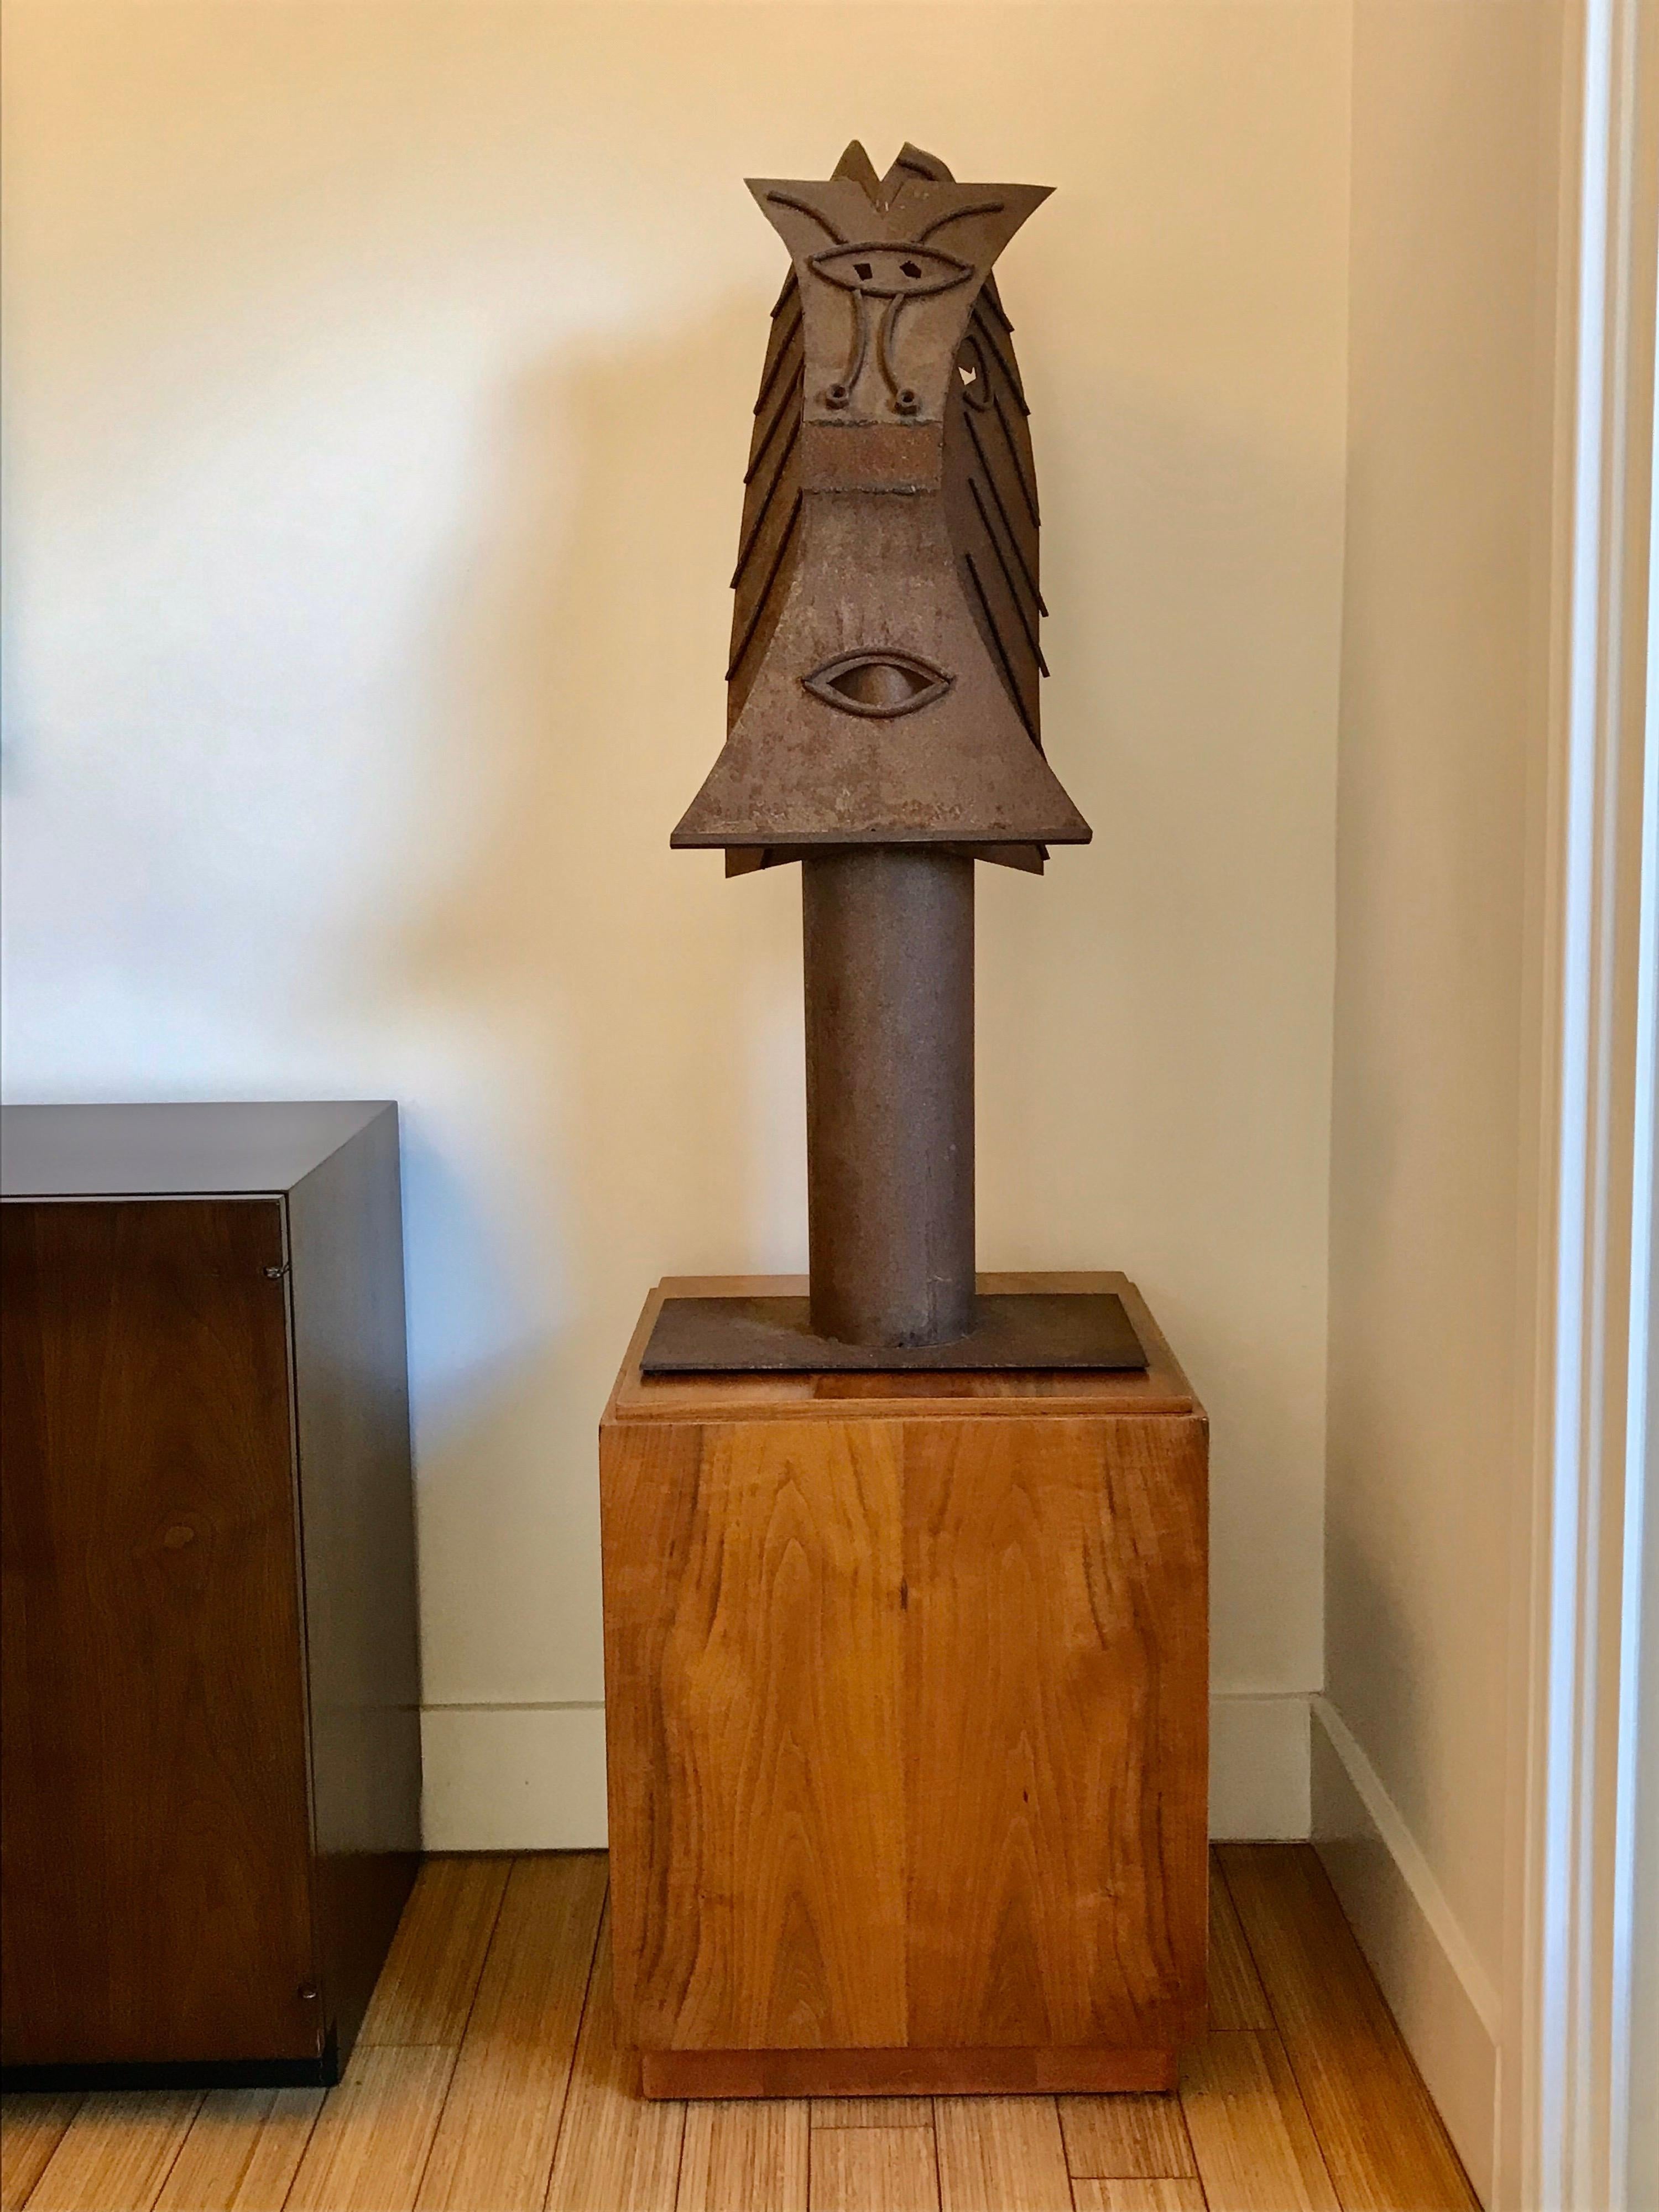 A rare piece to come up for sale. 
It appears to be a maquette done by Carl Nesjar for Picasso. 
The photo example shown is of another one from the book 